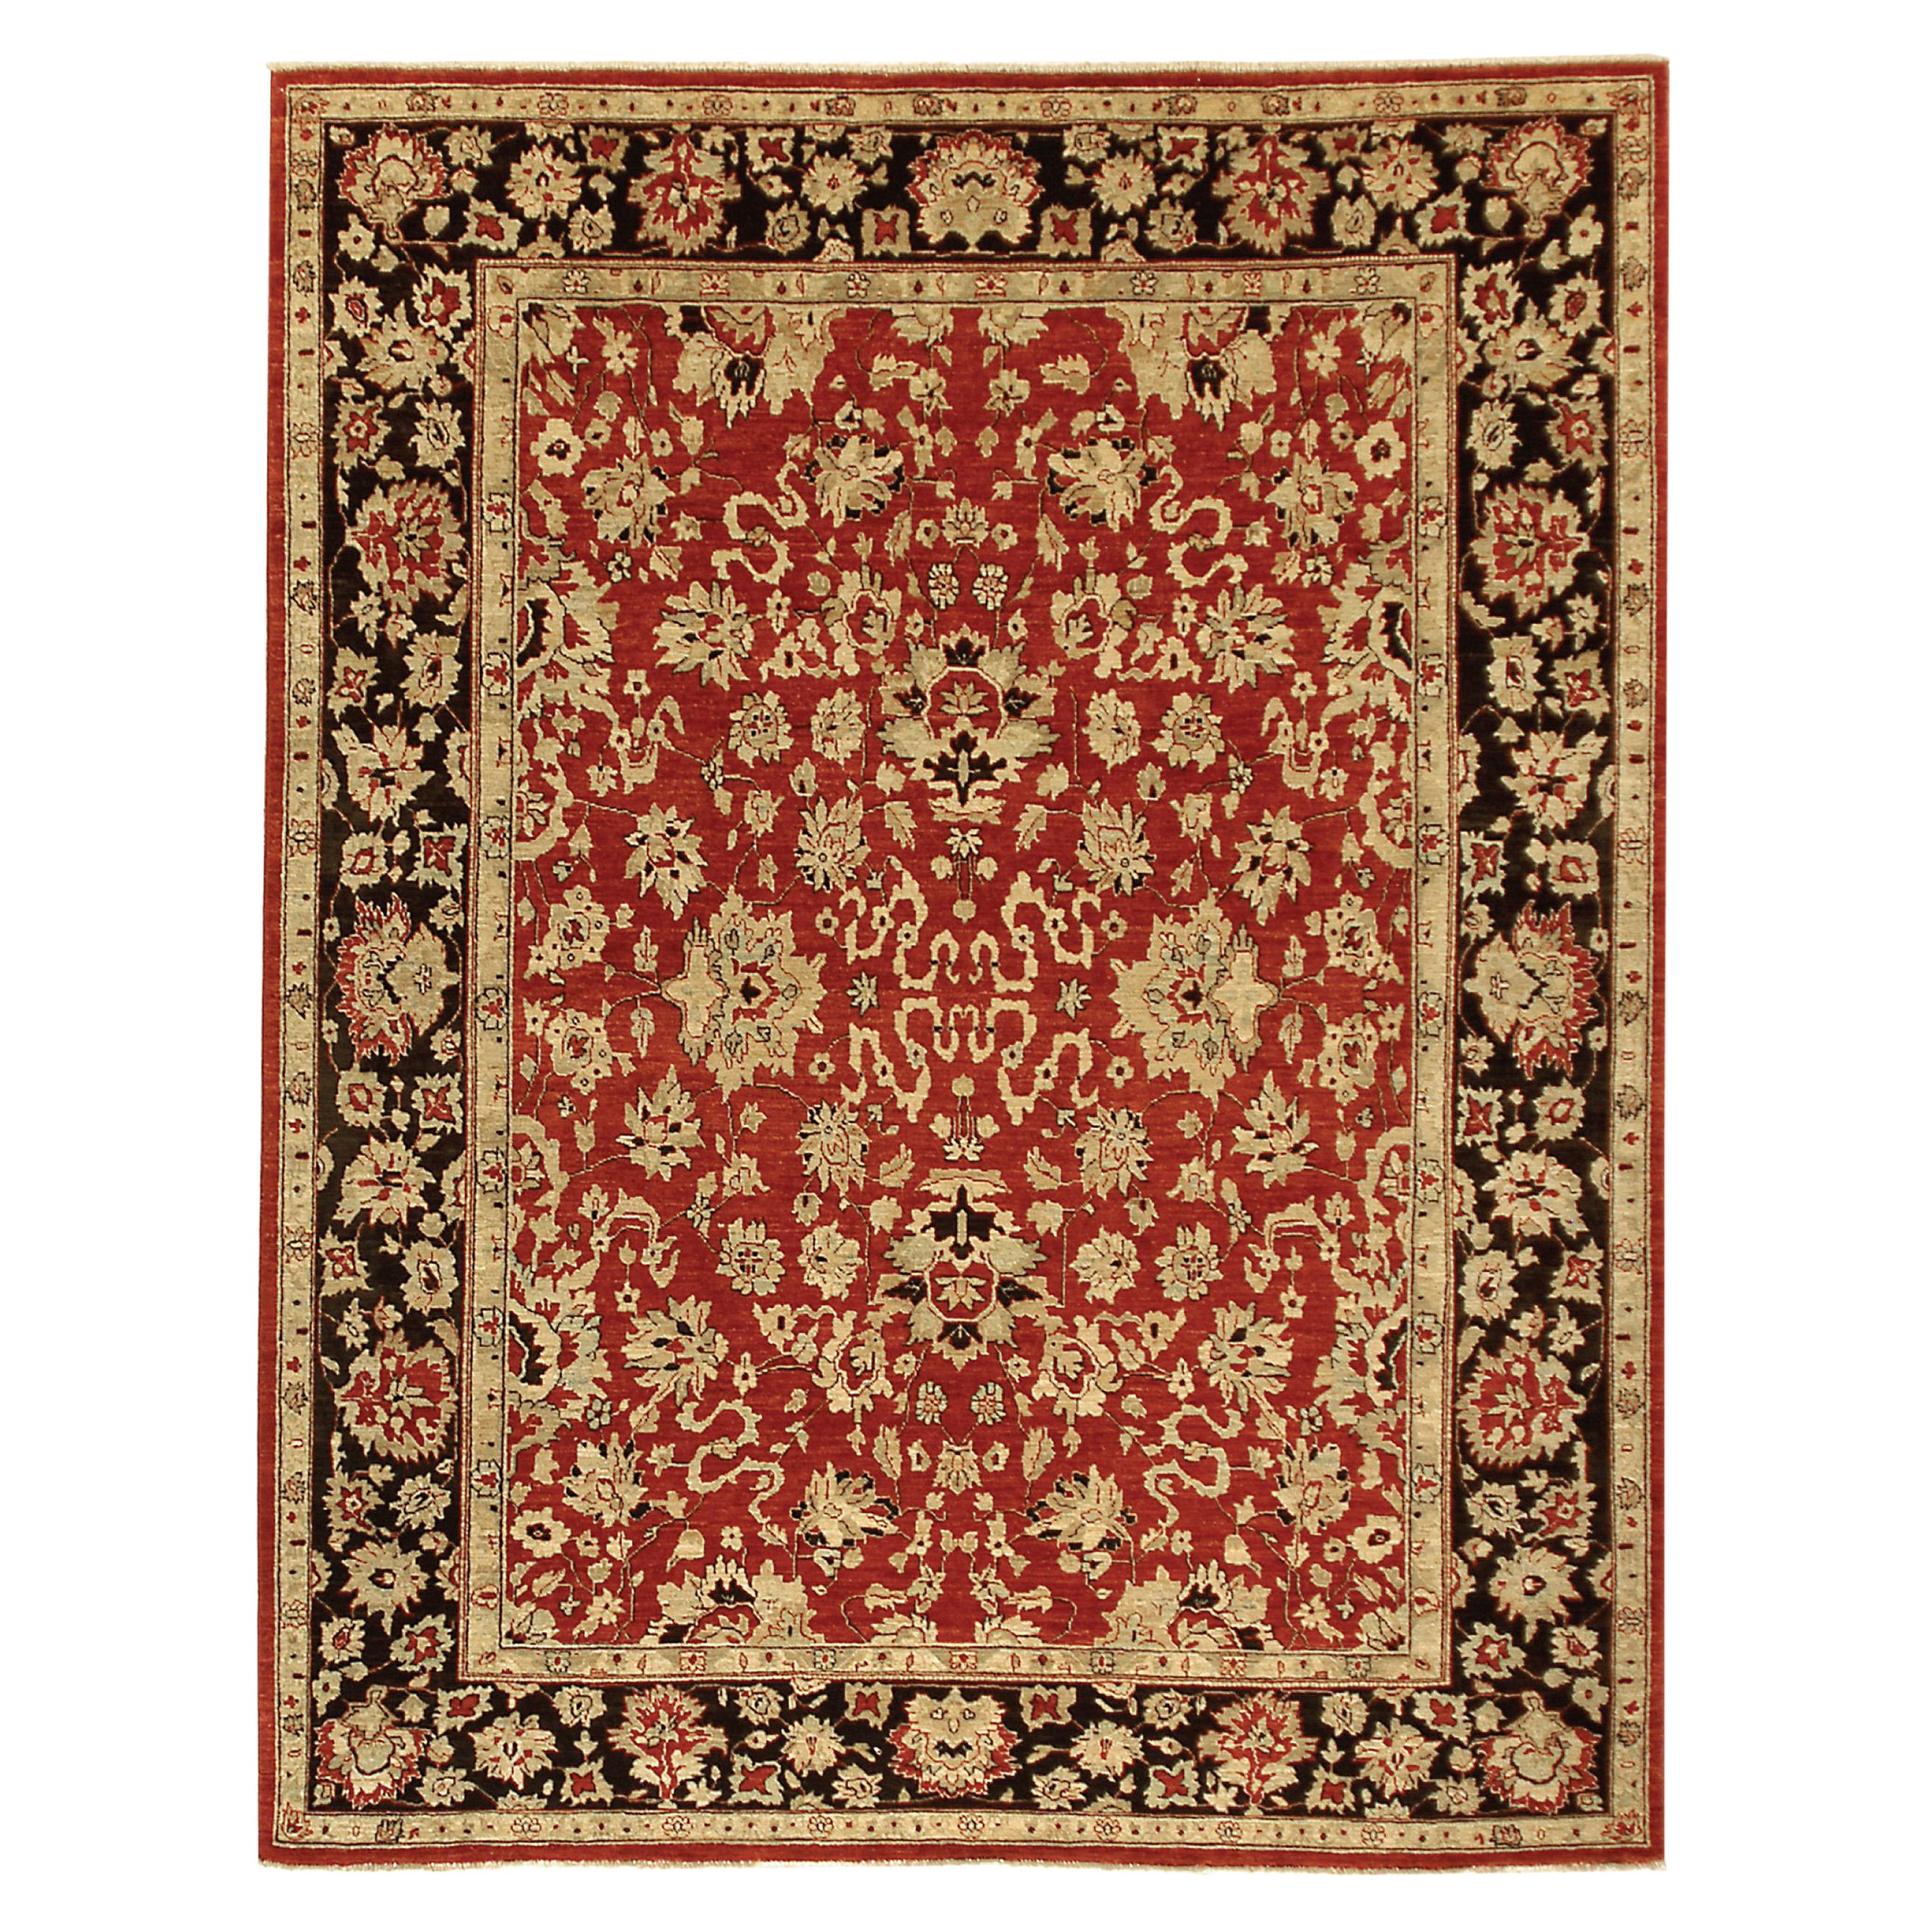 Luxury Traditional Hand-Knotted Agra Red & Black 12X18 Rug